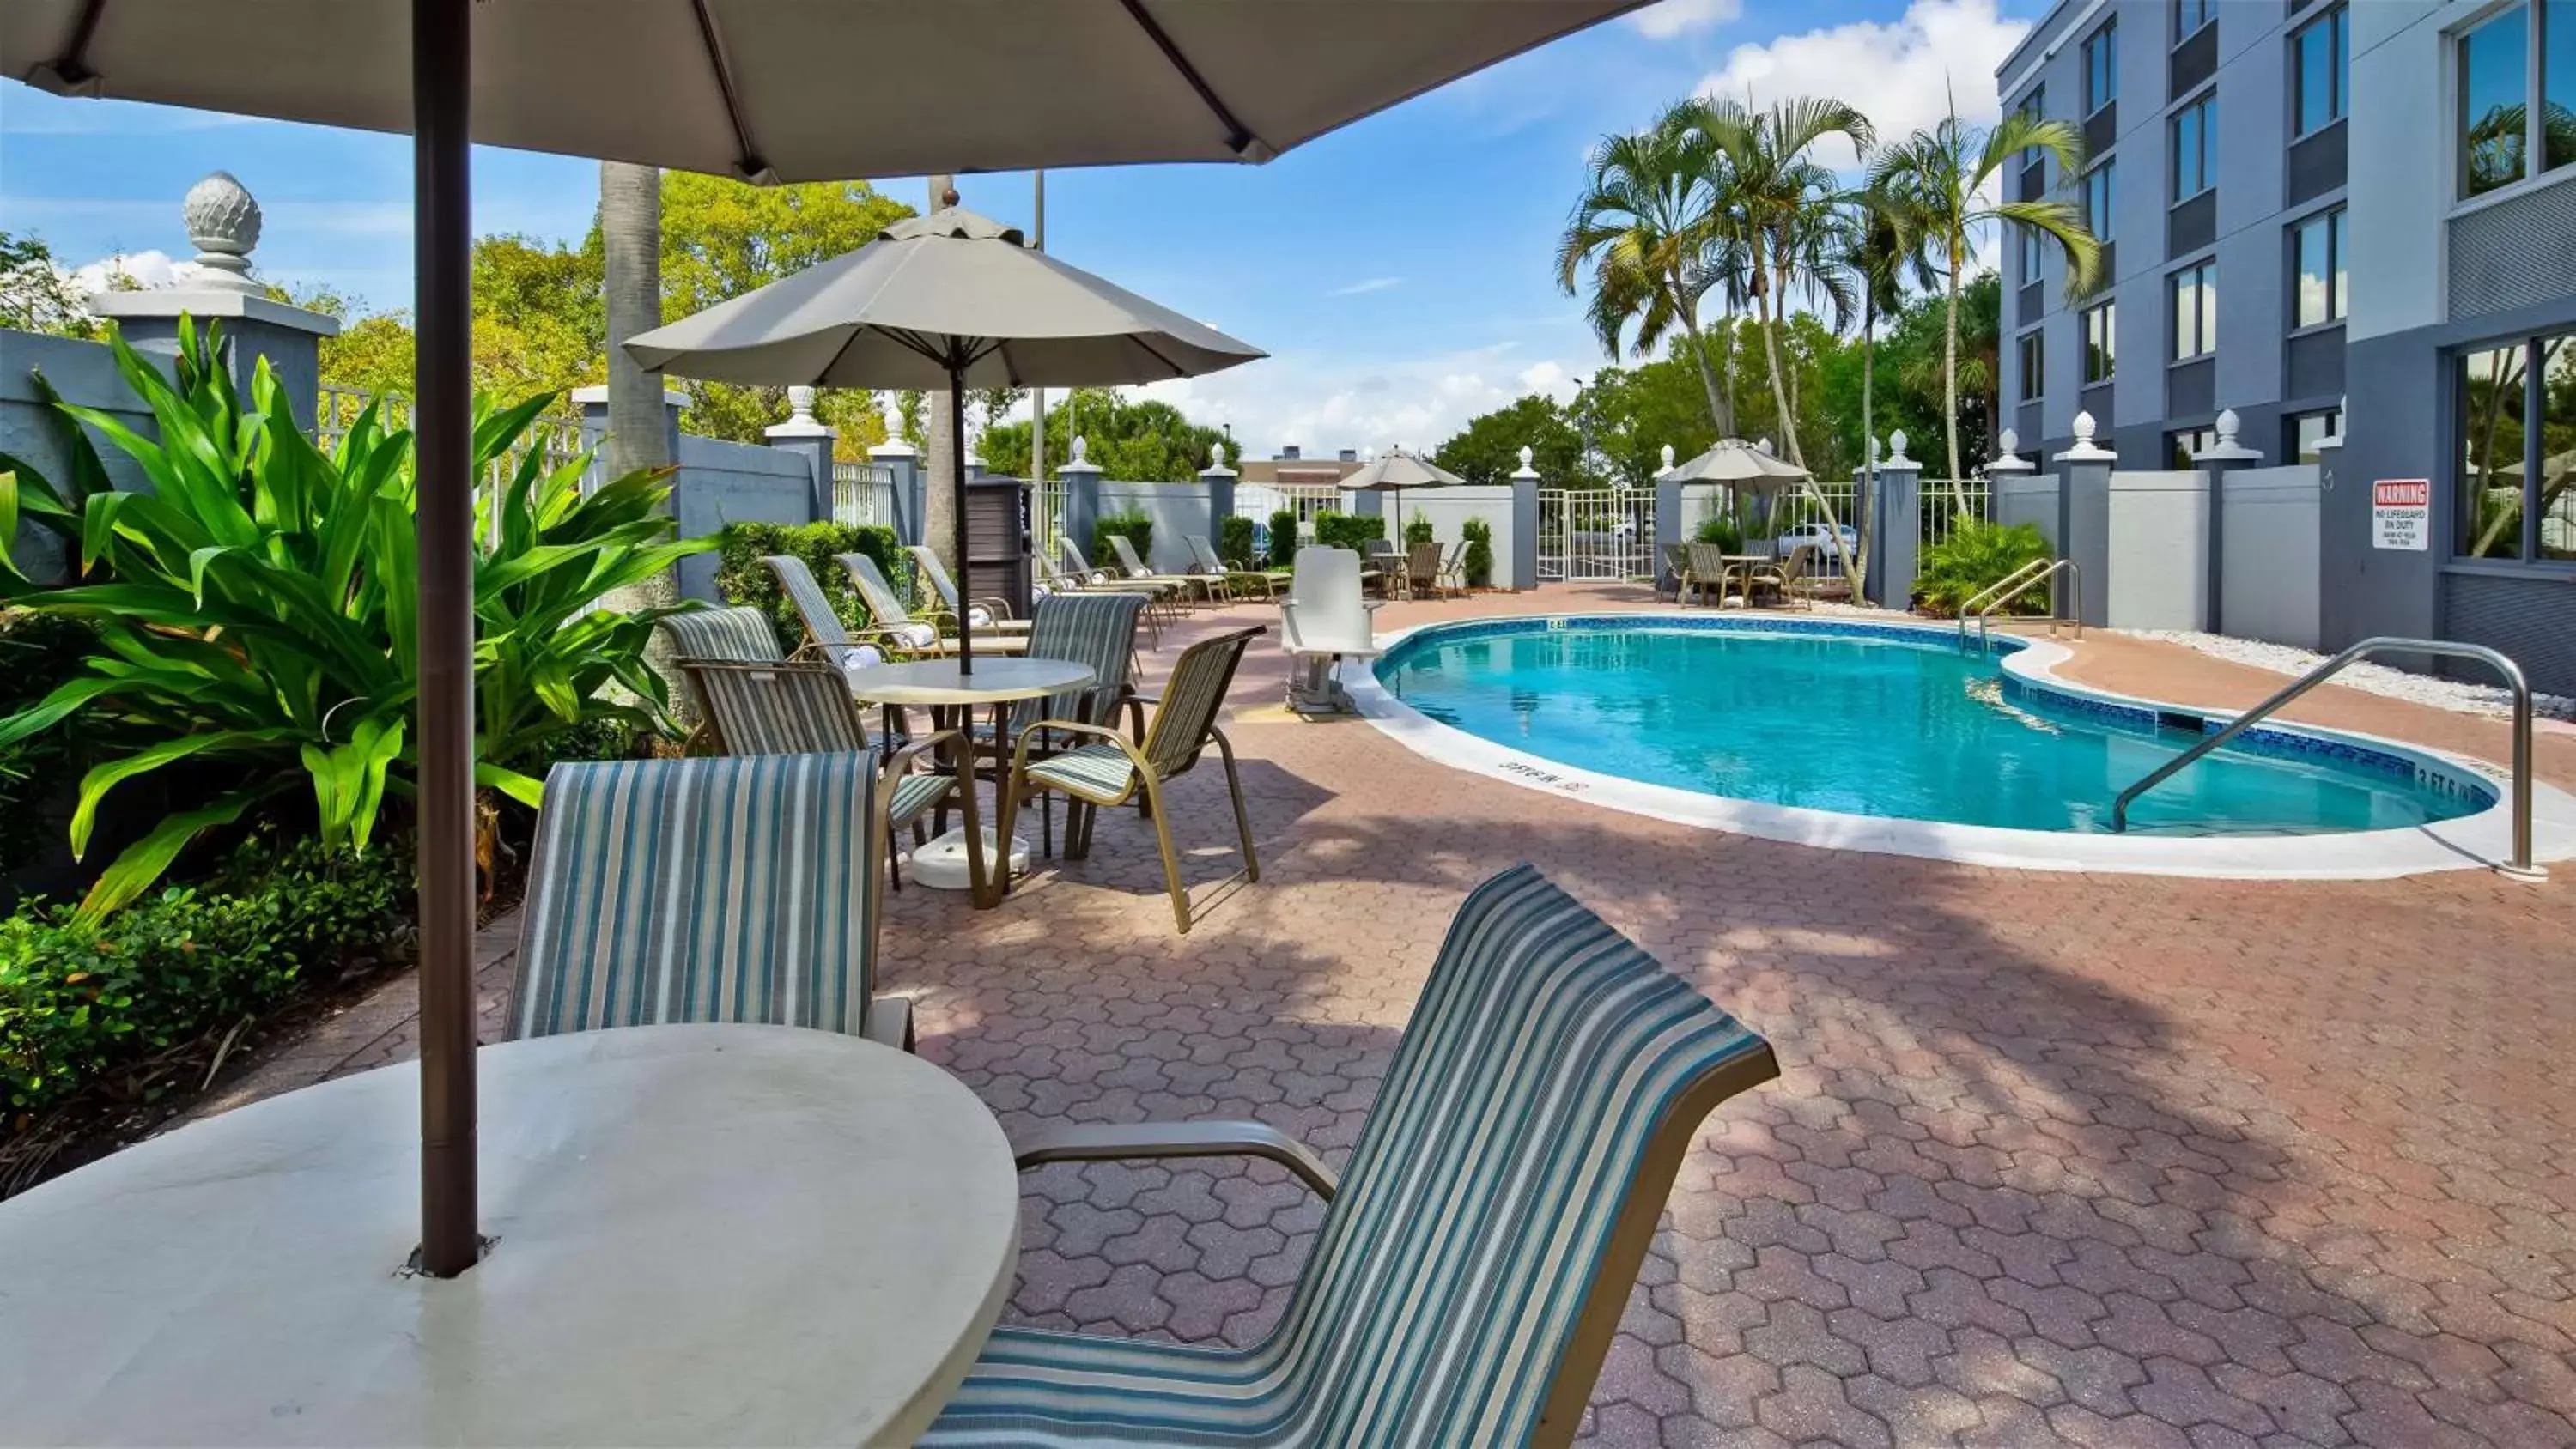 On site, Swimming Pool in Best Western Fort Myers Inn and Suites